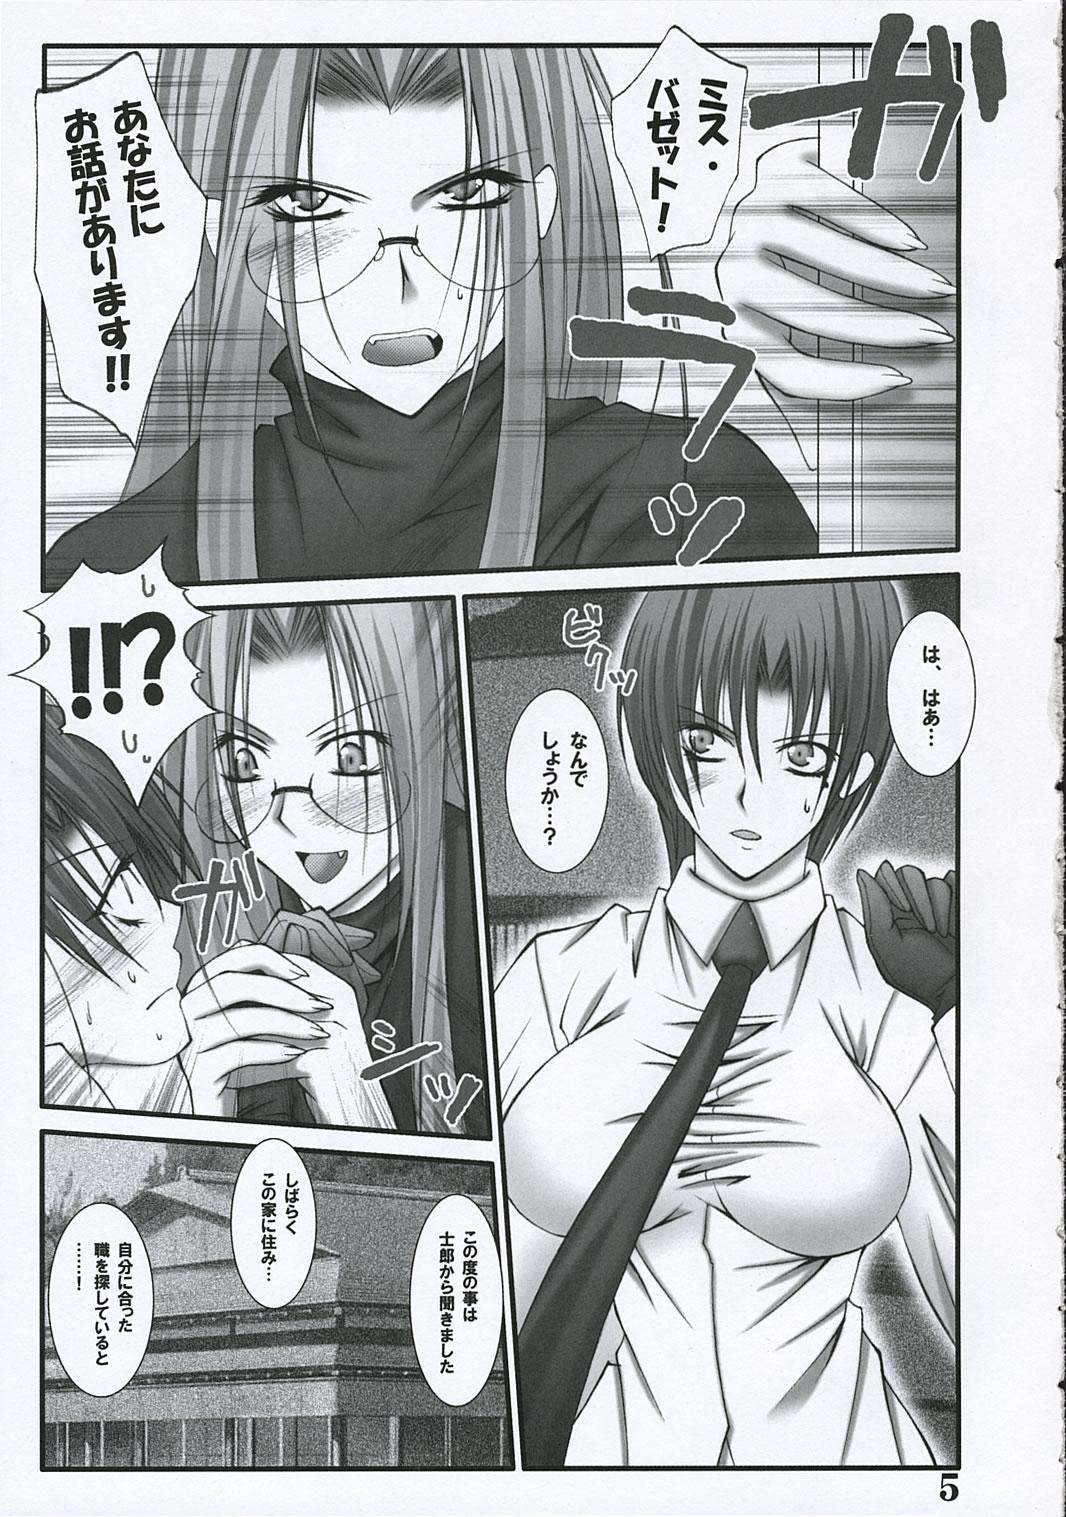 Canadian SEVENTH HEAVENS - Fate hollow ataraxia Gay Friend - Page 4